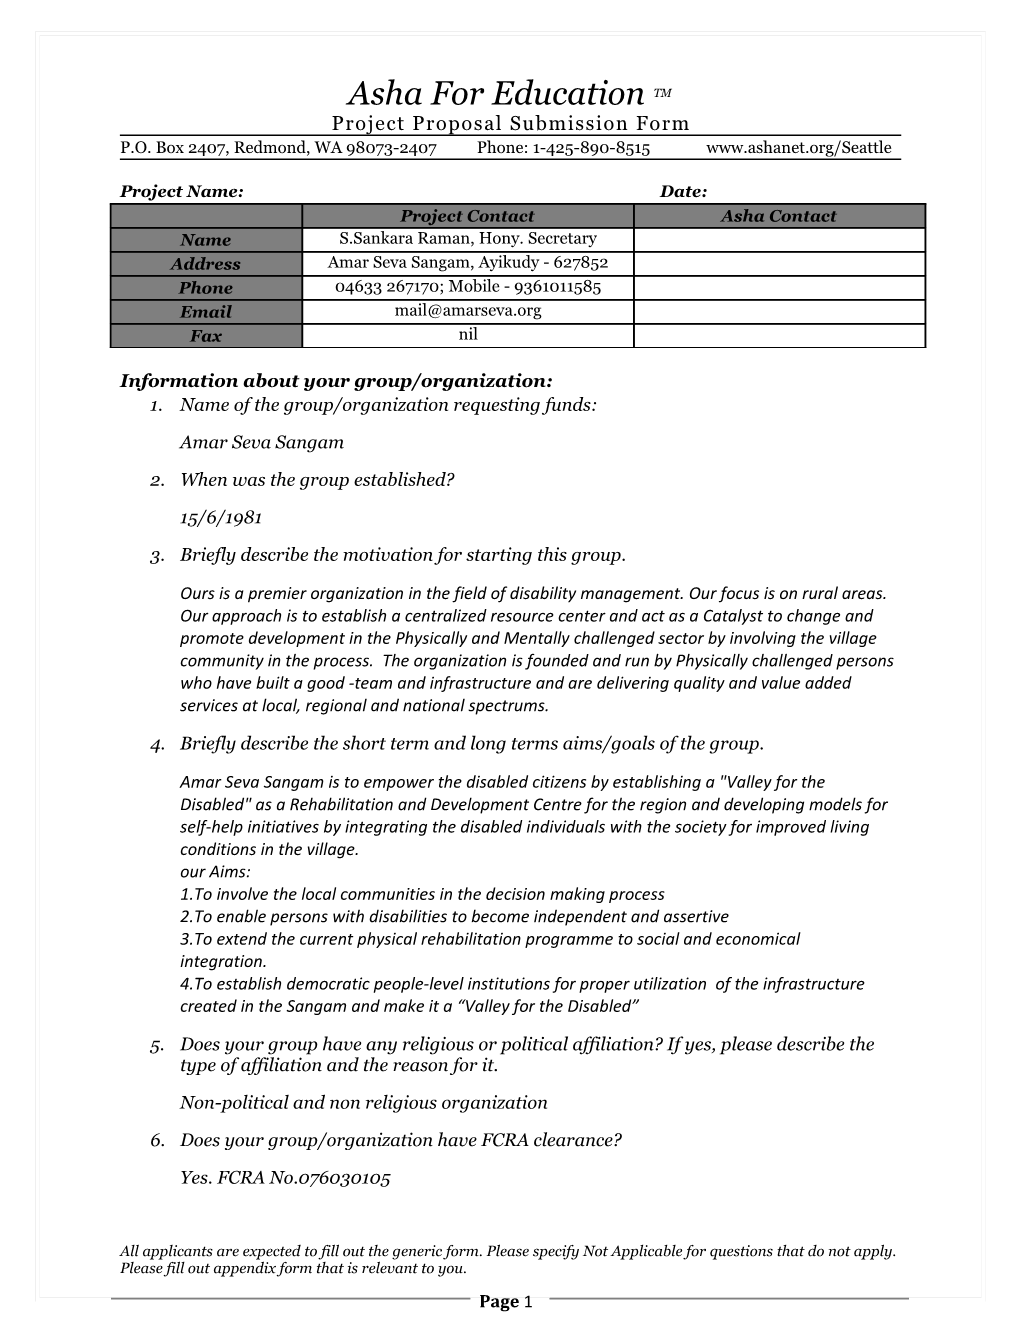 Asha for Education TM Project Proposal Submission Form